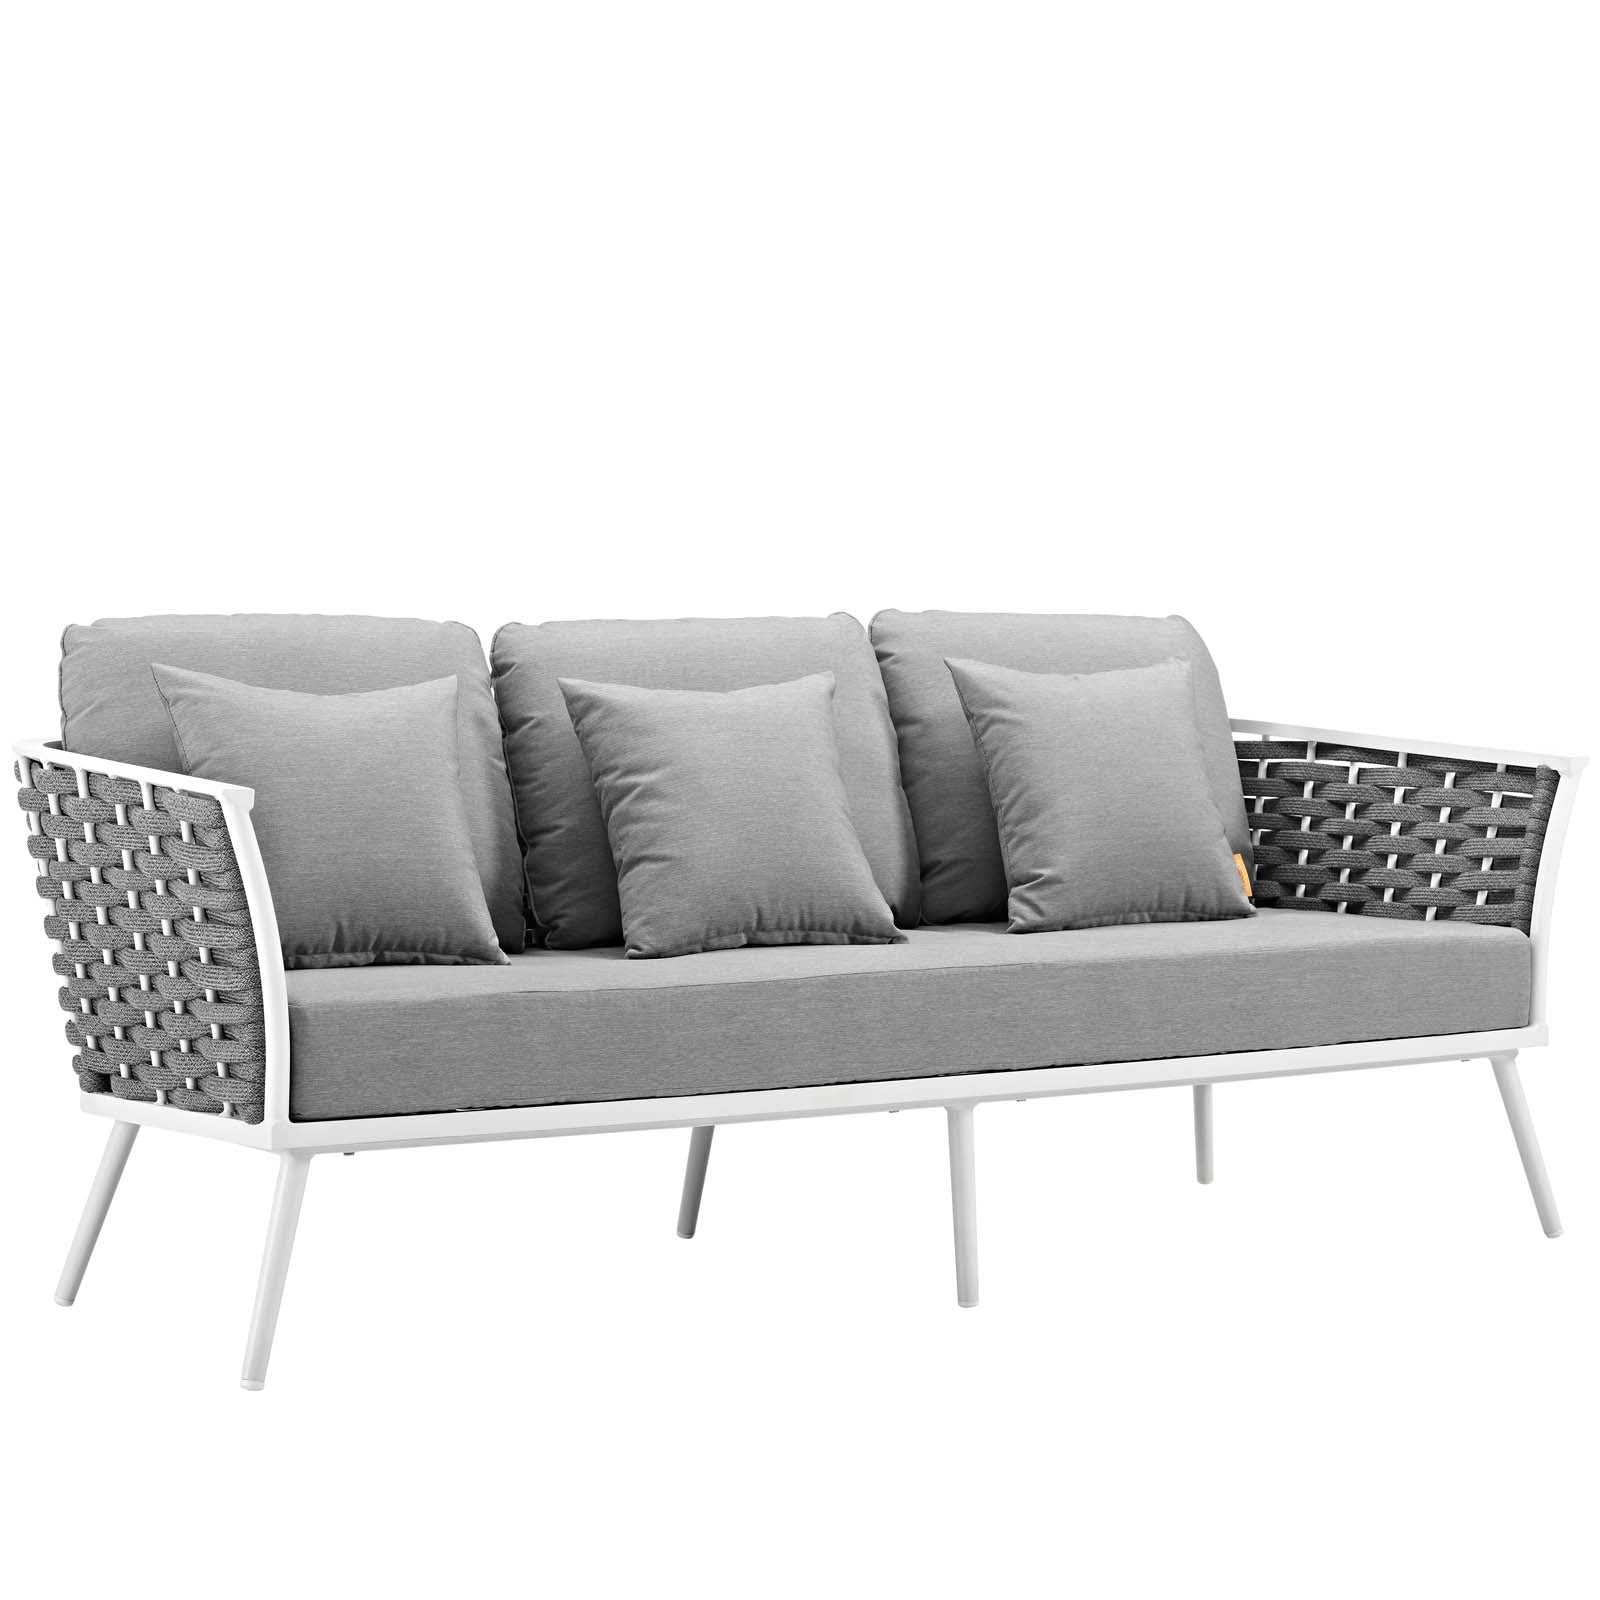 Stance 5 Piece Outdoor 139.5"W & 32 H Patio Aluminum Sectional Sofa Set White